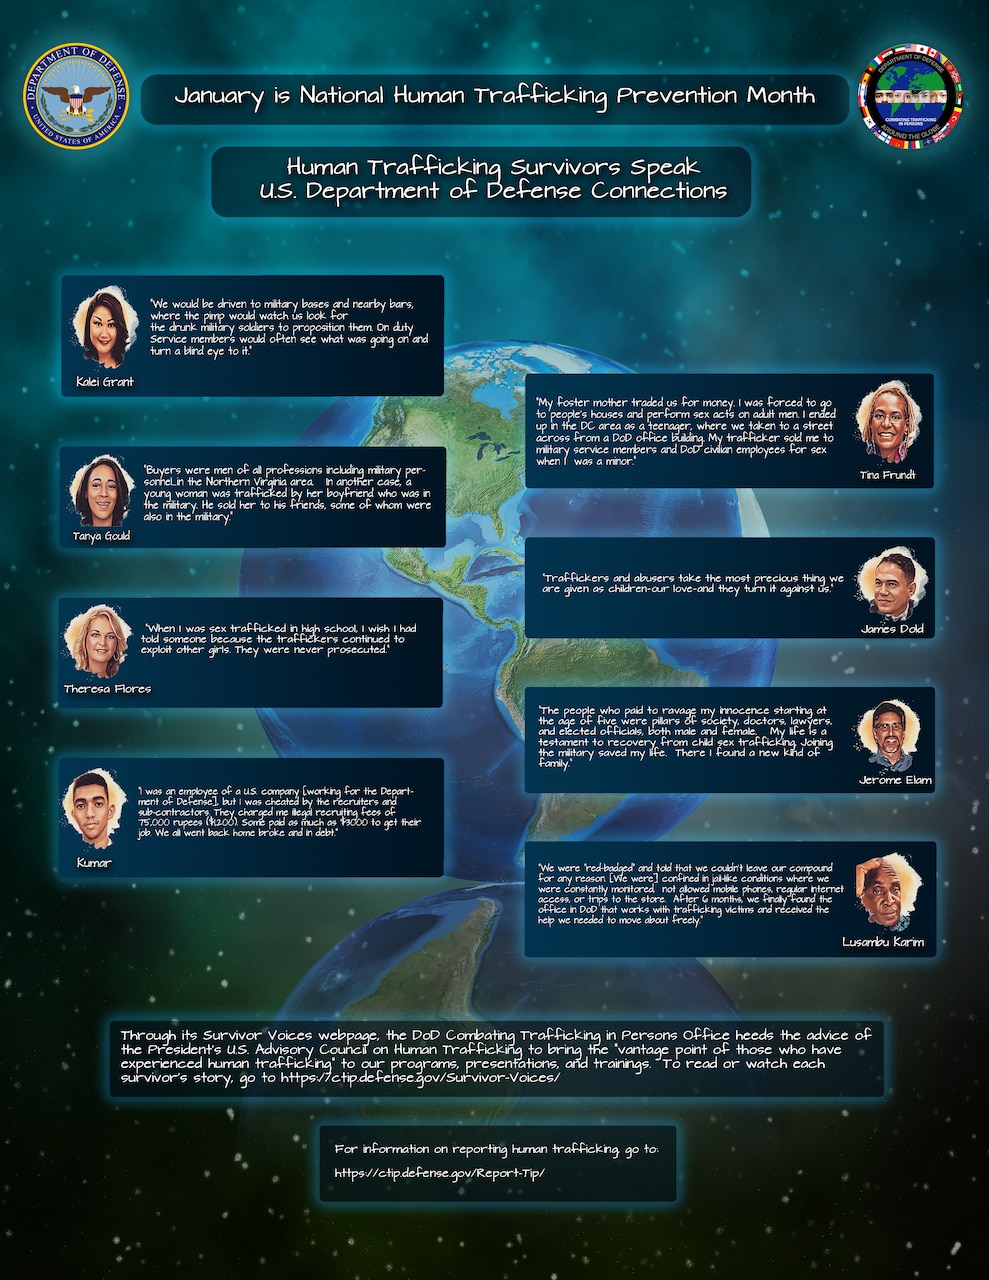 Infographic displaying Images of eight human trafficking survivors sharing their experiences in front of a painted earth in space.